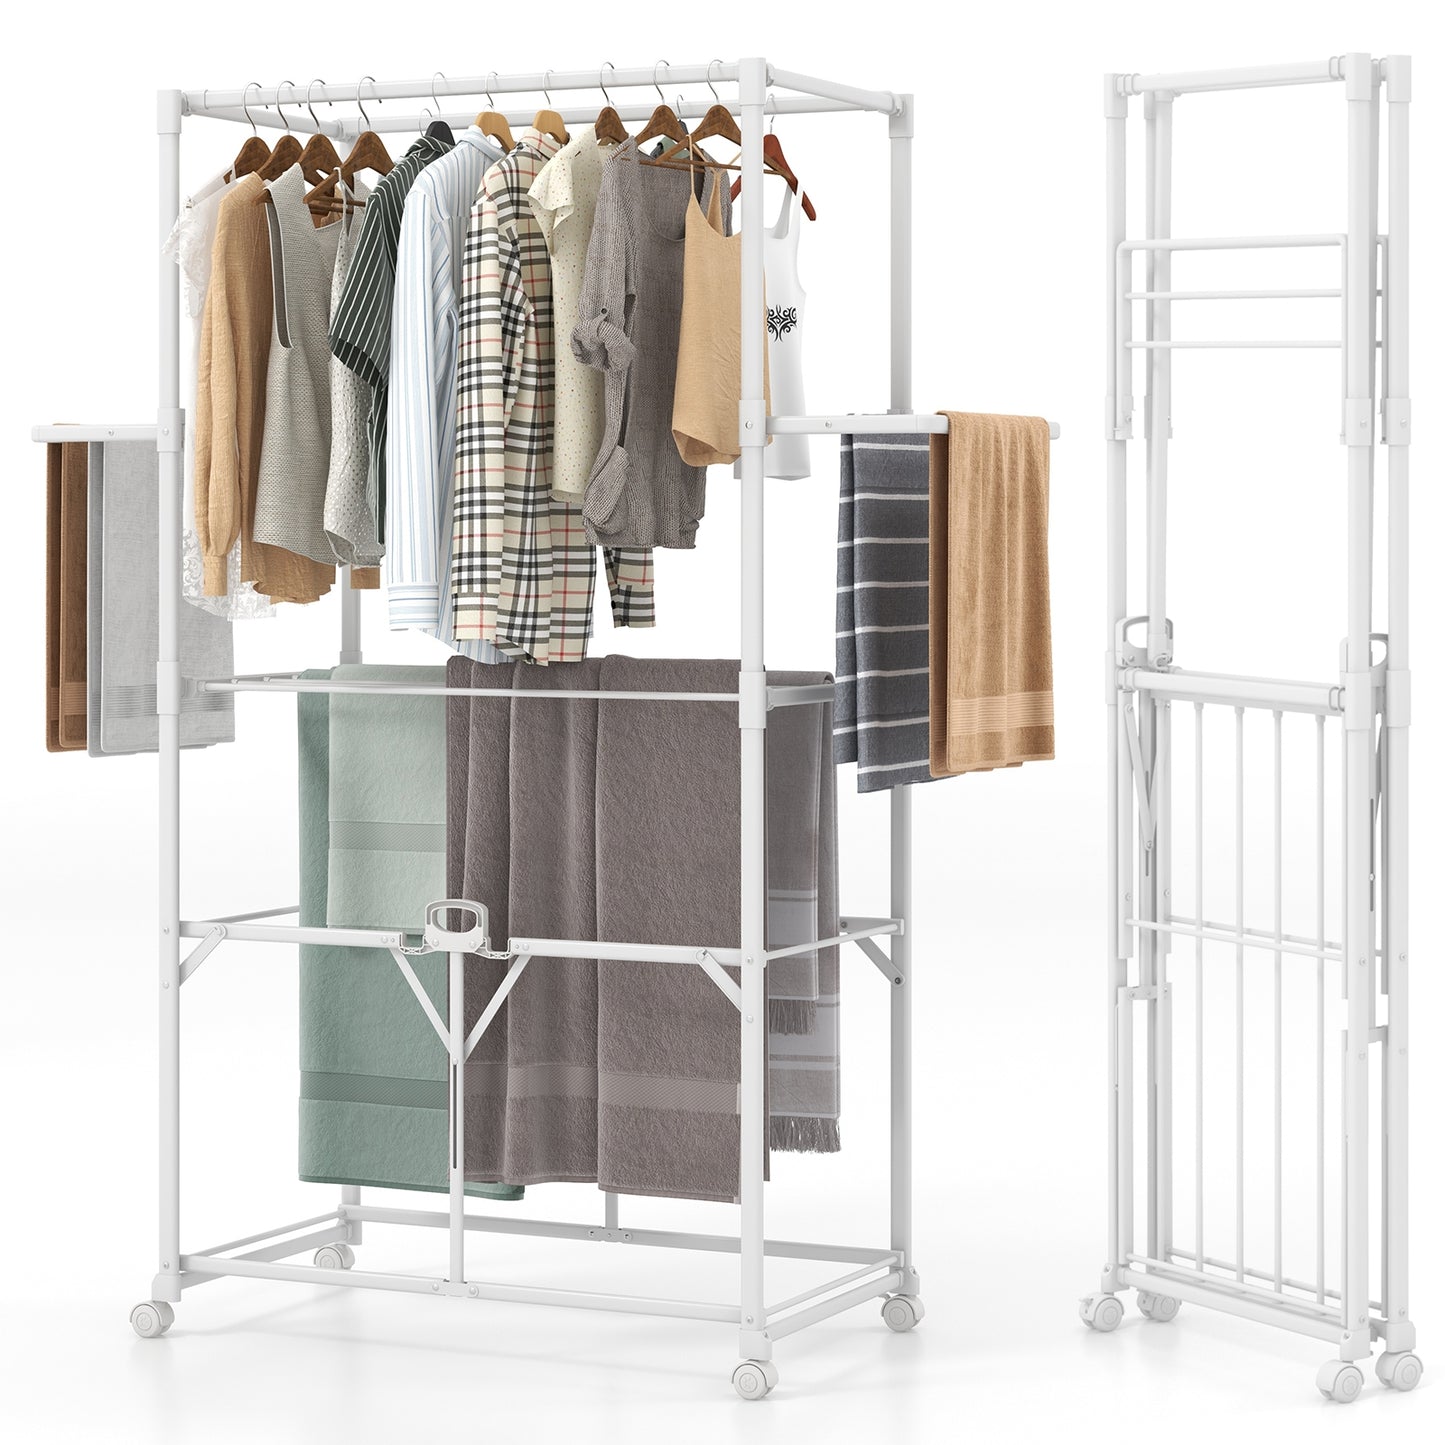 68.5 Inches Foldable Aluminum Laundry Rack with Hanging Rods and Drying Shelves-White